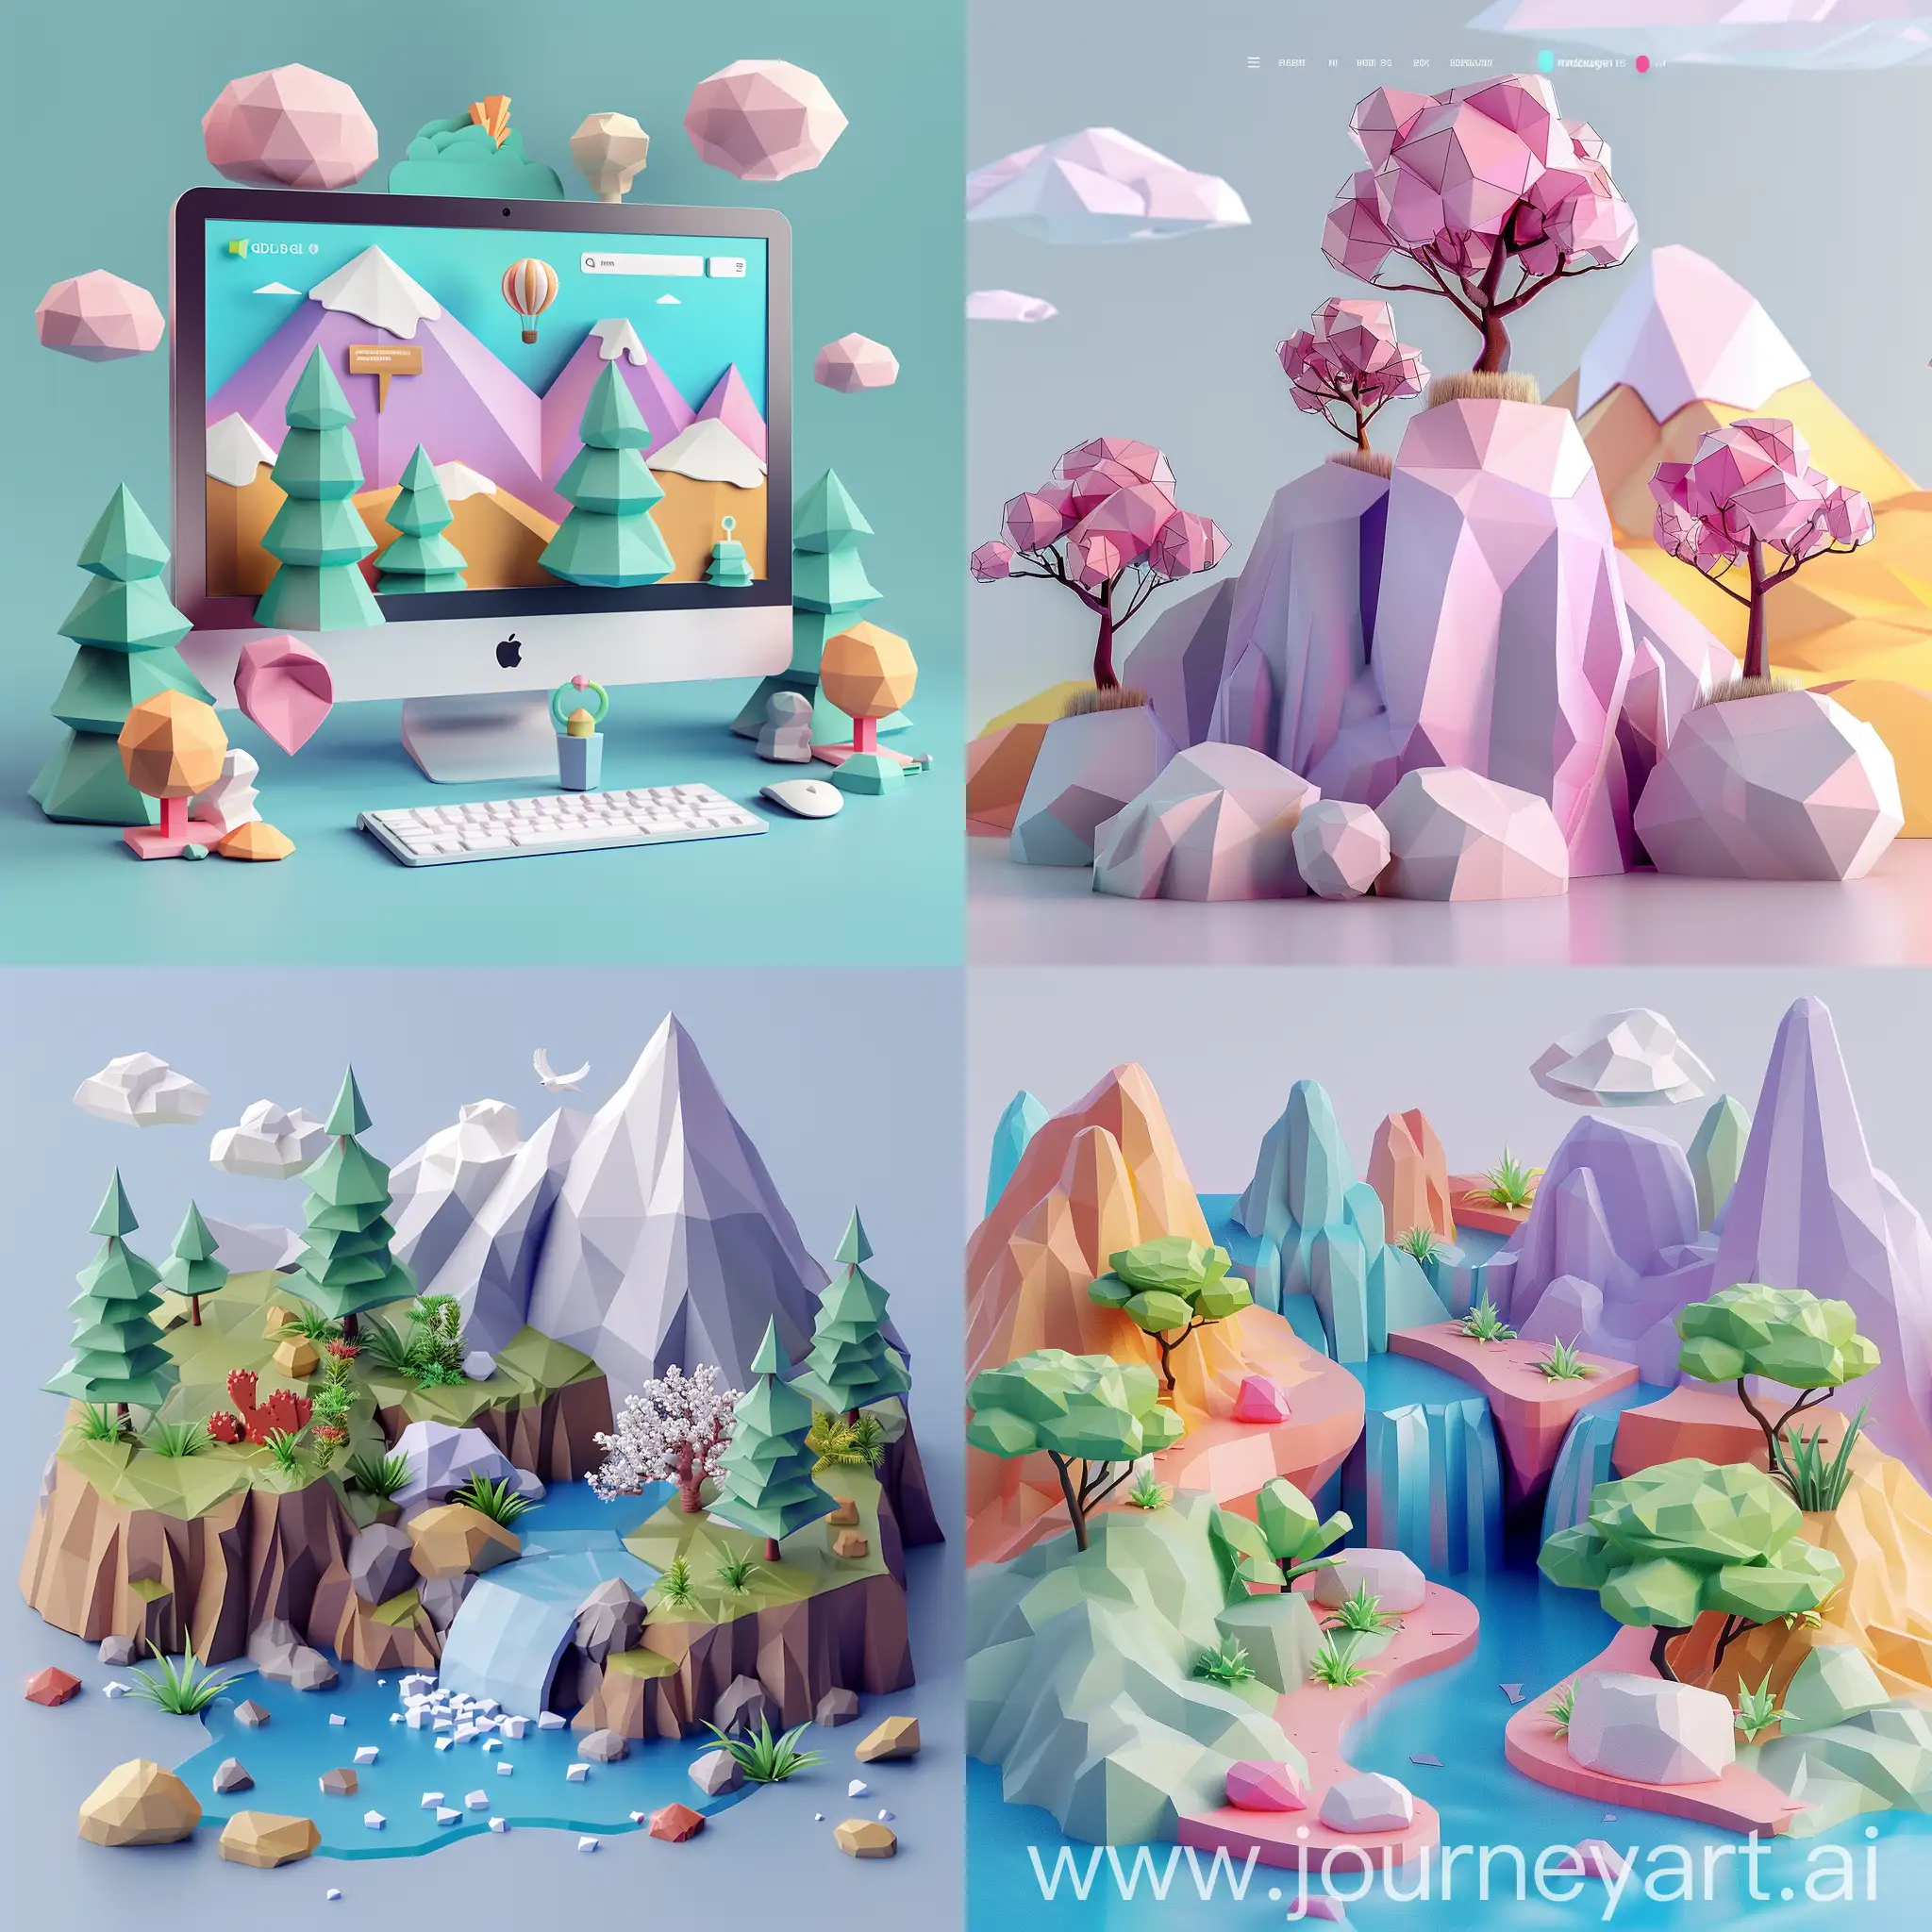 Stunning-Low-Poly-3D-Website-Design-with-WebGL-Artistry